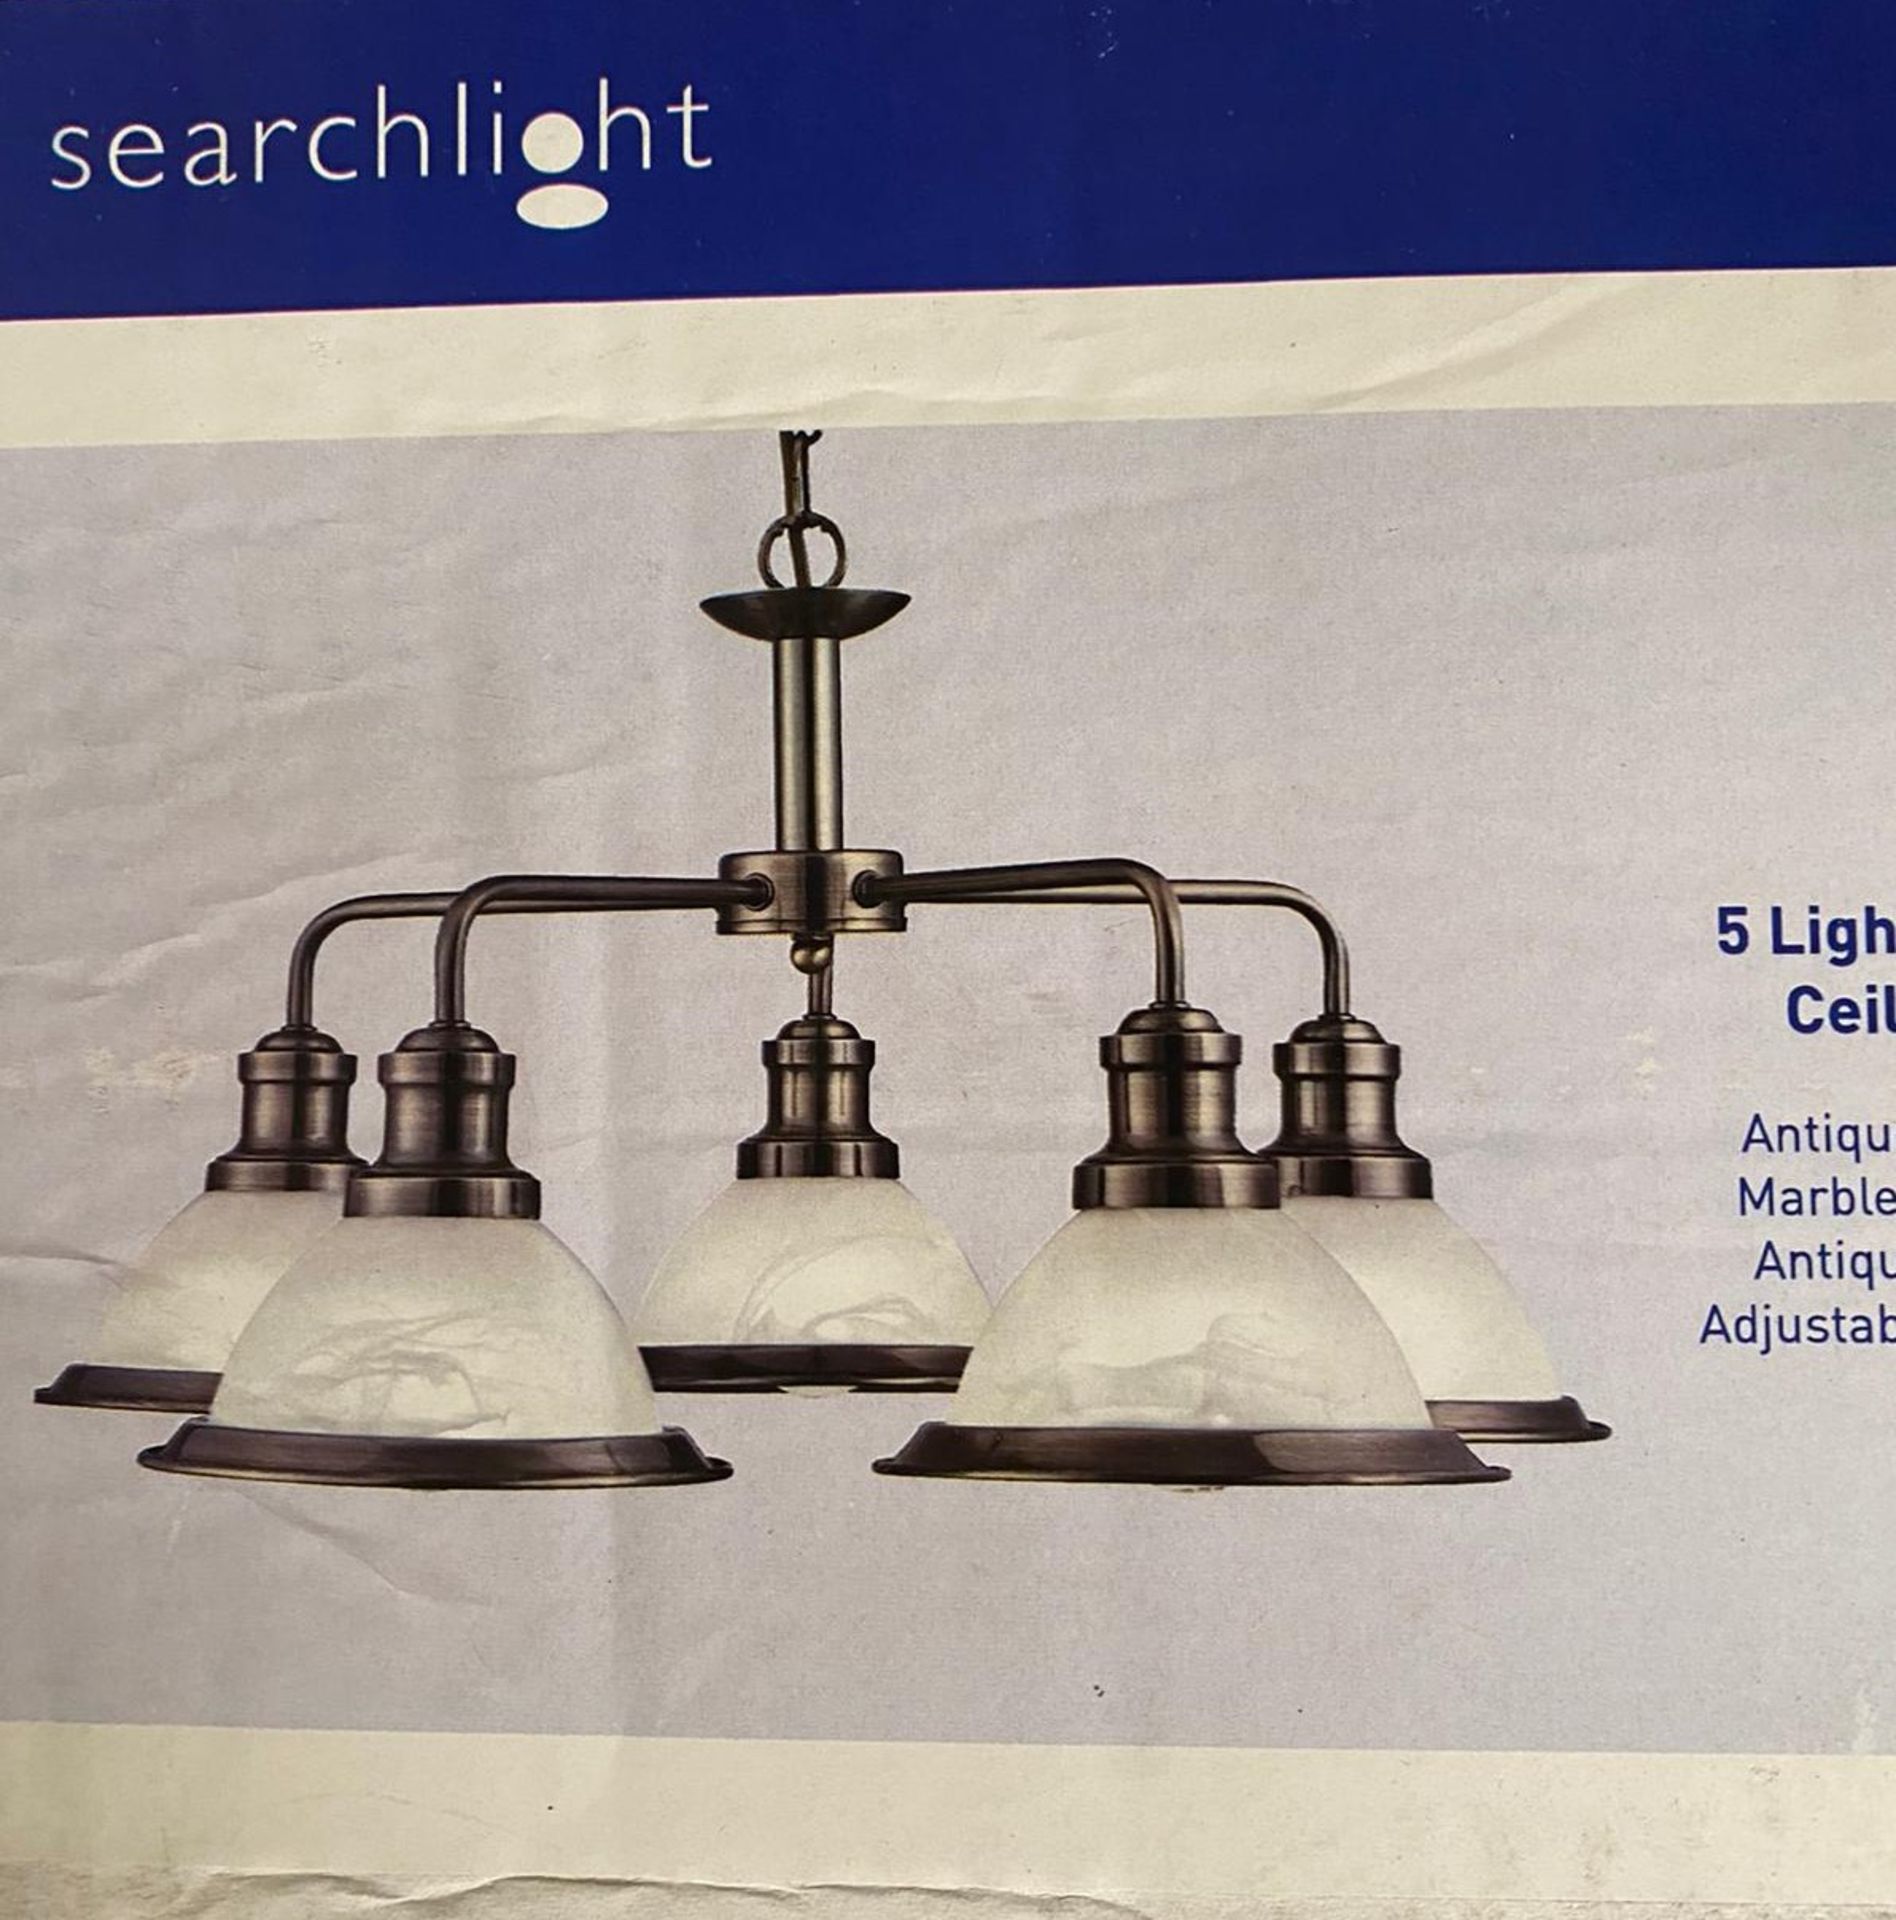 1 x Searchlight Industrial Ceiling Light in Antique Brass - Ref: 1595-5AB -New and Boxed - RRP: £150 - Image 4 of 5